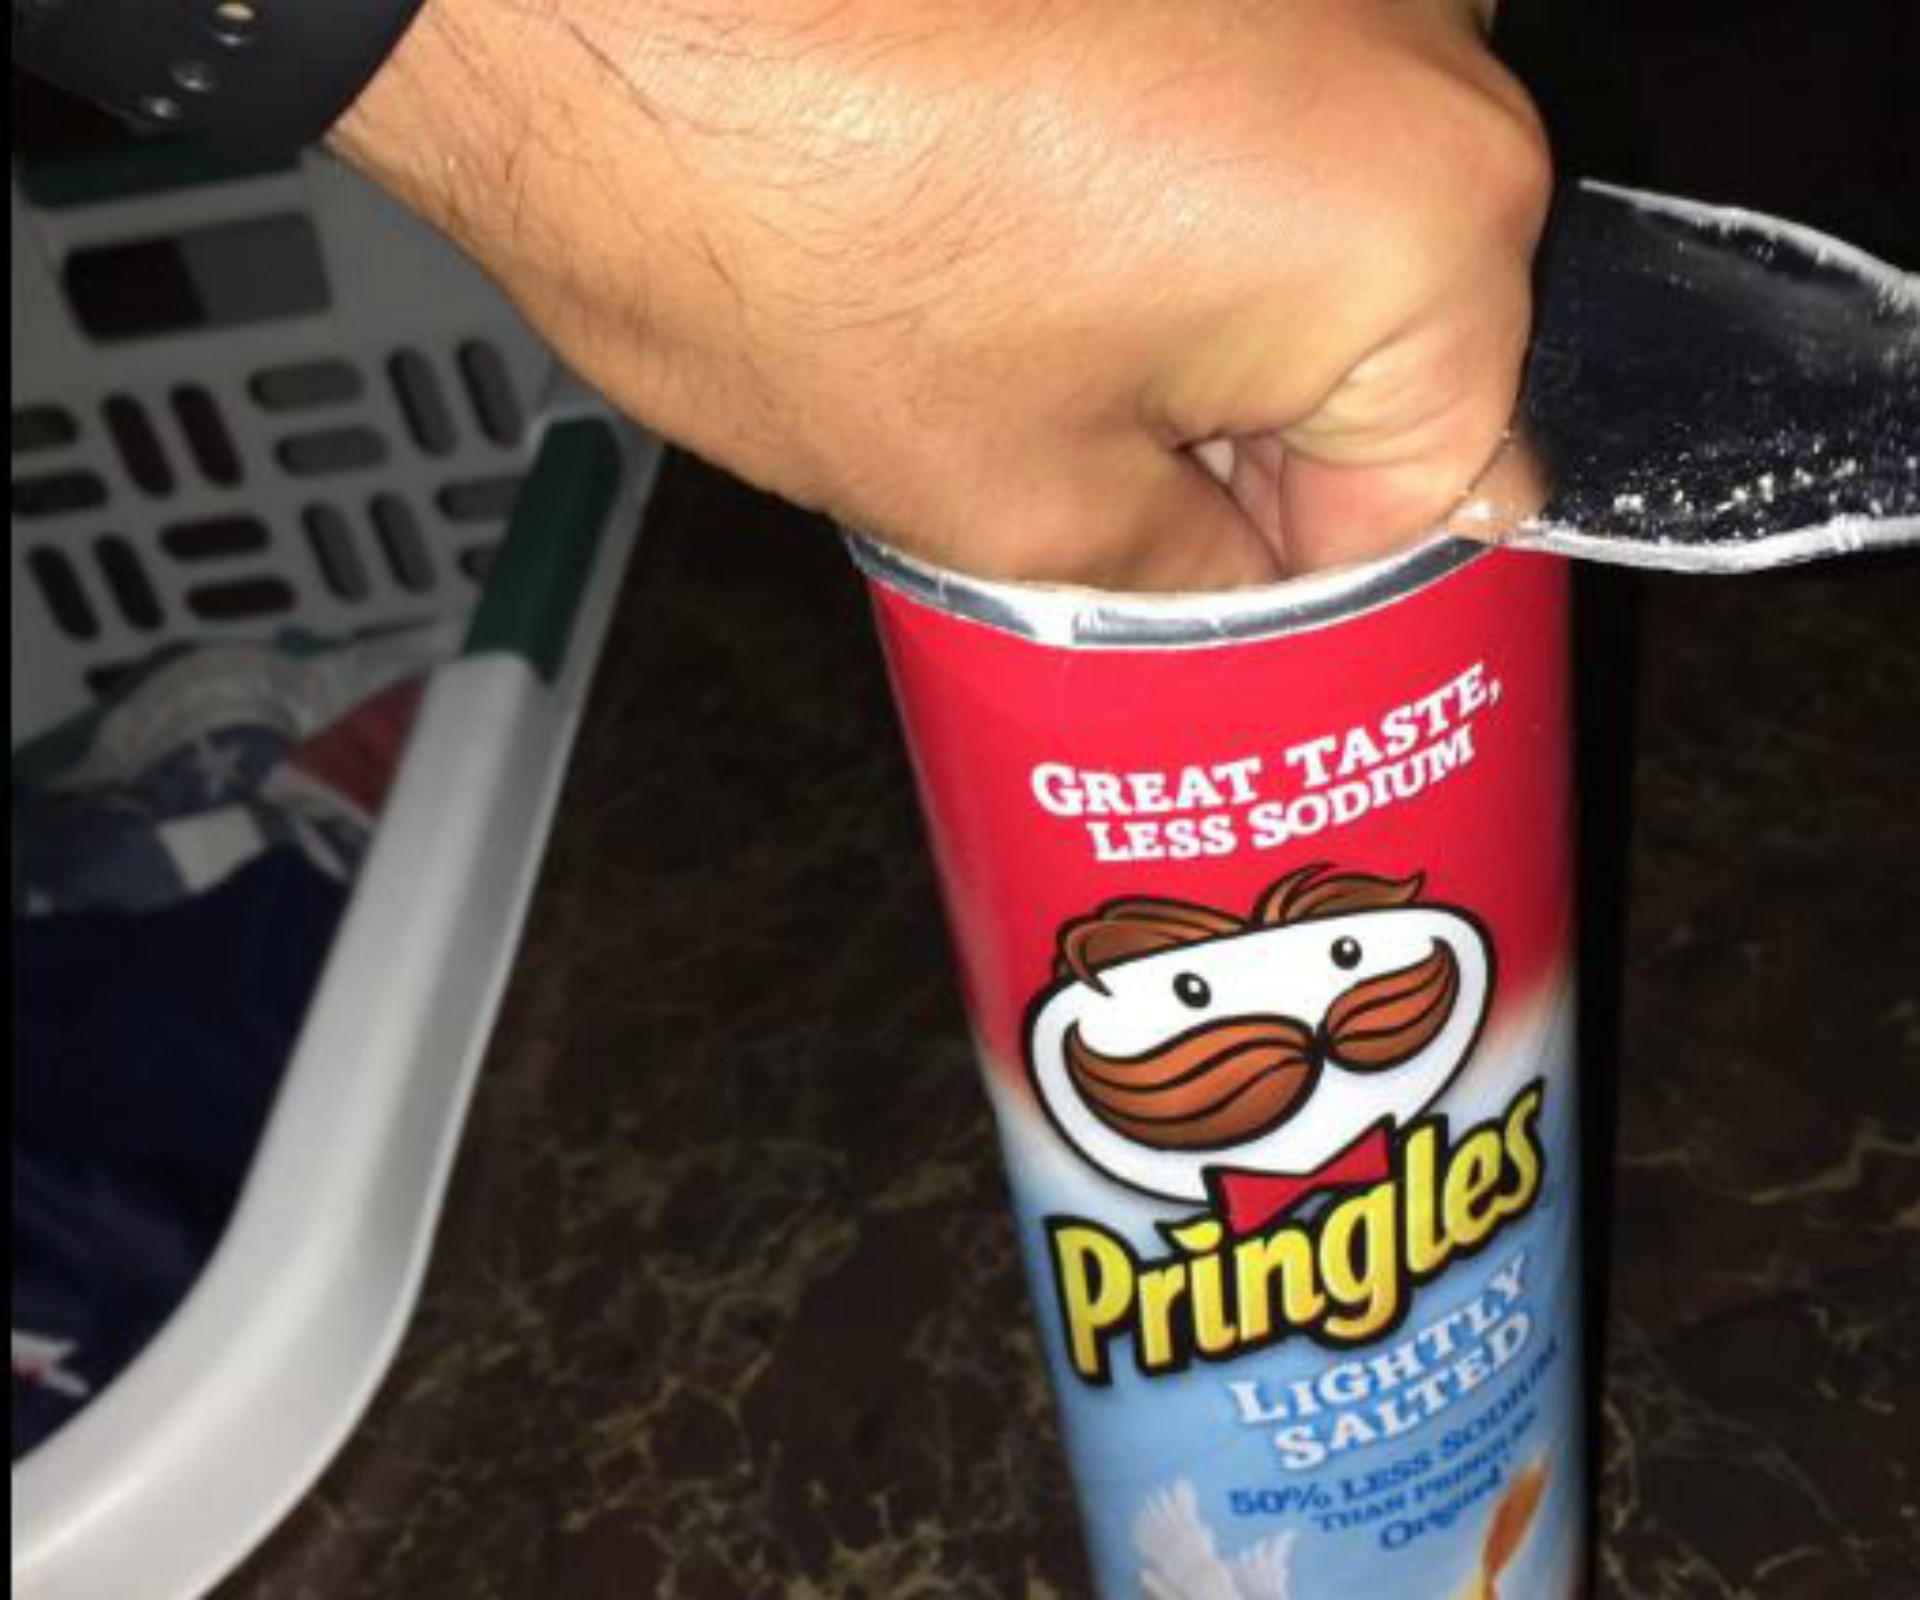 Why everyone is blowing up about Pringles